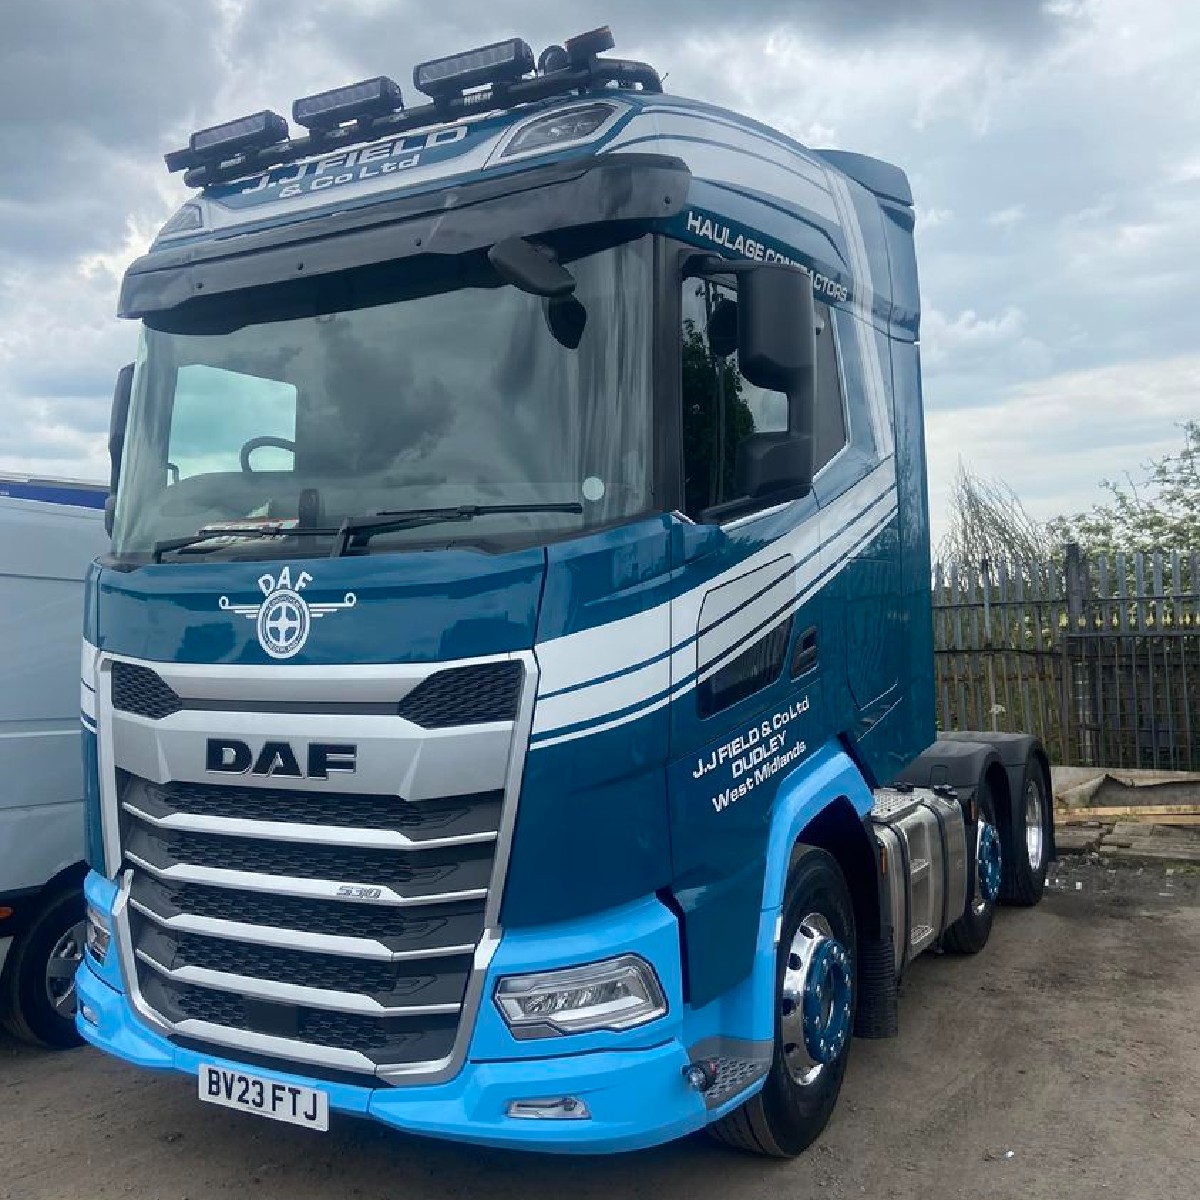 Kicking off the week with this cracking XG 530 🤩

The third New Generation truck to enter service for West Midlands based hauliers J J Field & Co Ltd.

#newtruck #newgenerationdaf #dafxg #trucklife #newtruckday